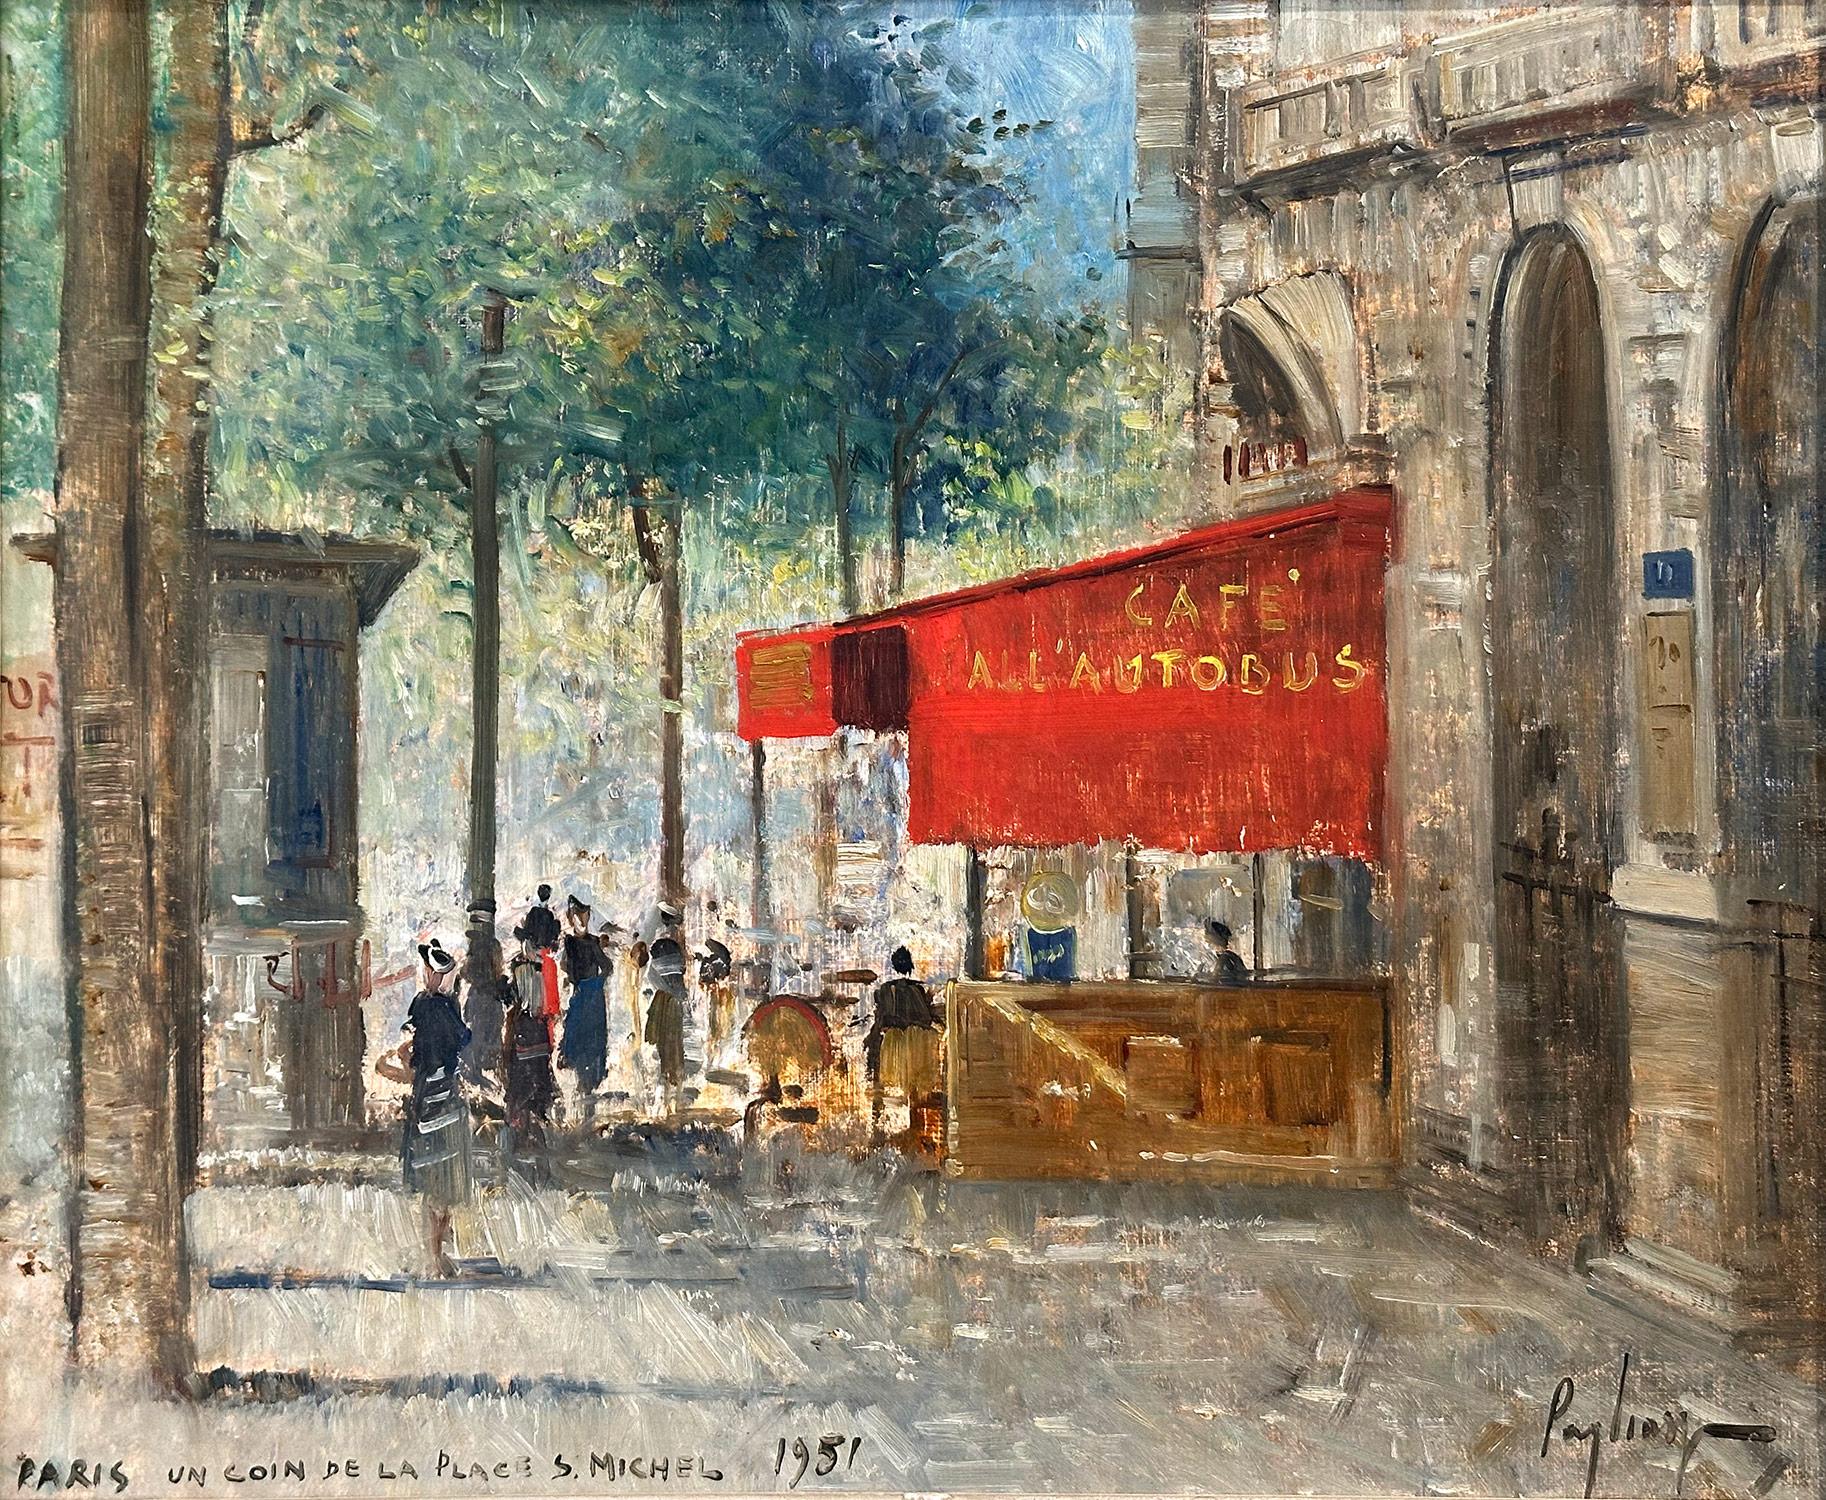 A beautiful oil on canvas painting by the French artist, 
Francesco Pagliazzi. Pagliazzi was a French painter known for his colorfully rich cityscapes depicting the times of his generation. From Milan, to Monte Carlo to Paris, his lust for life and